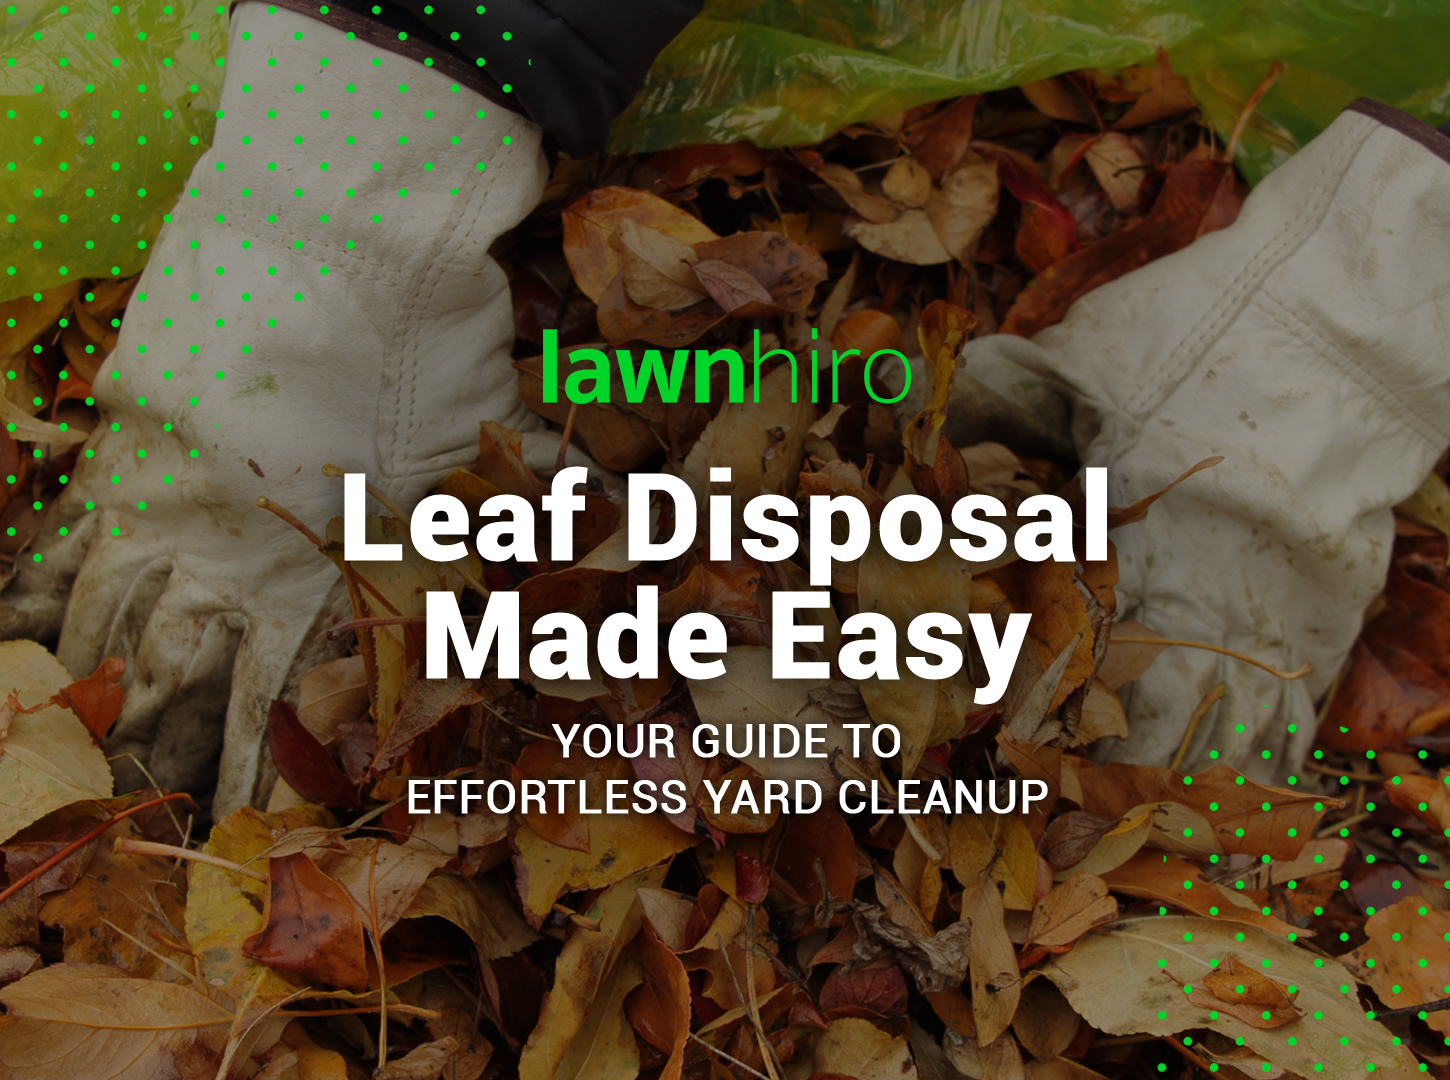 Featured image for “Leaf Disposal Made Easy: Your Guide to Effortless Yard Cleanup”